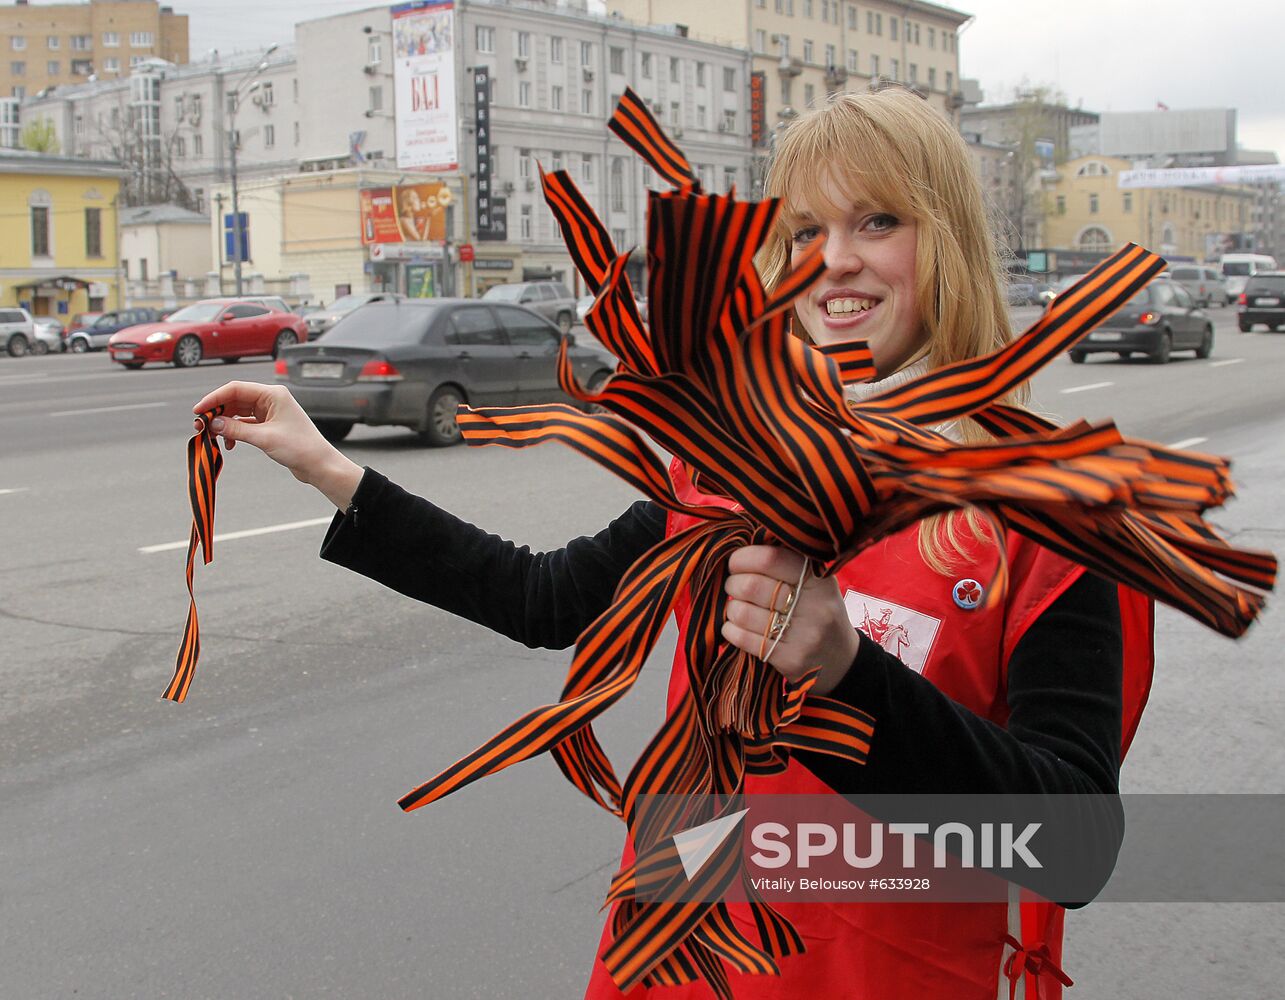 St. George's Ribbon campaign kicks off in Moscow